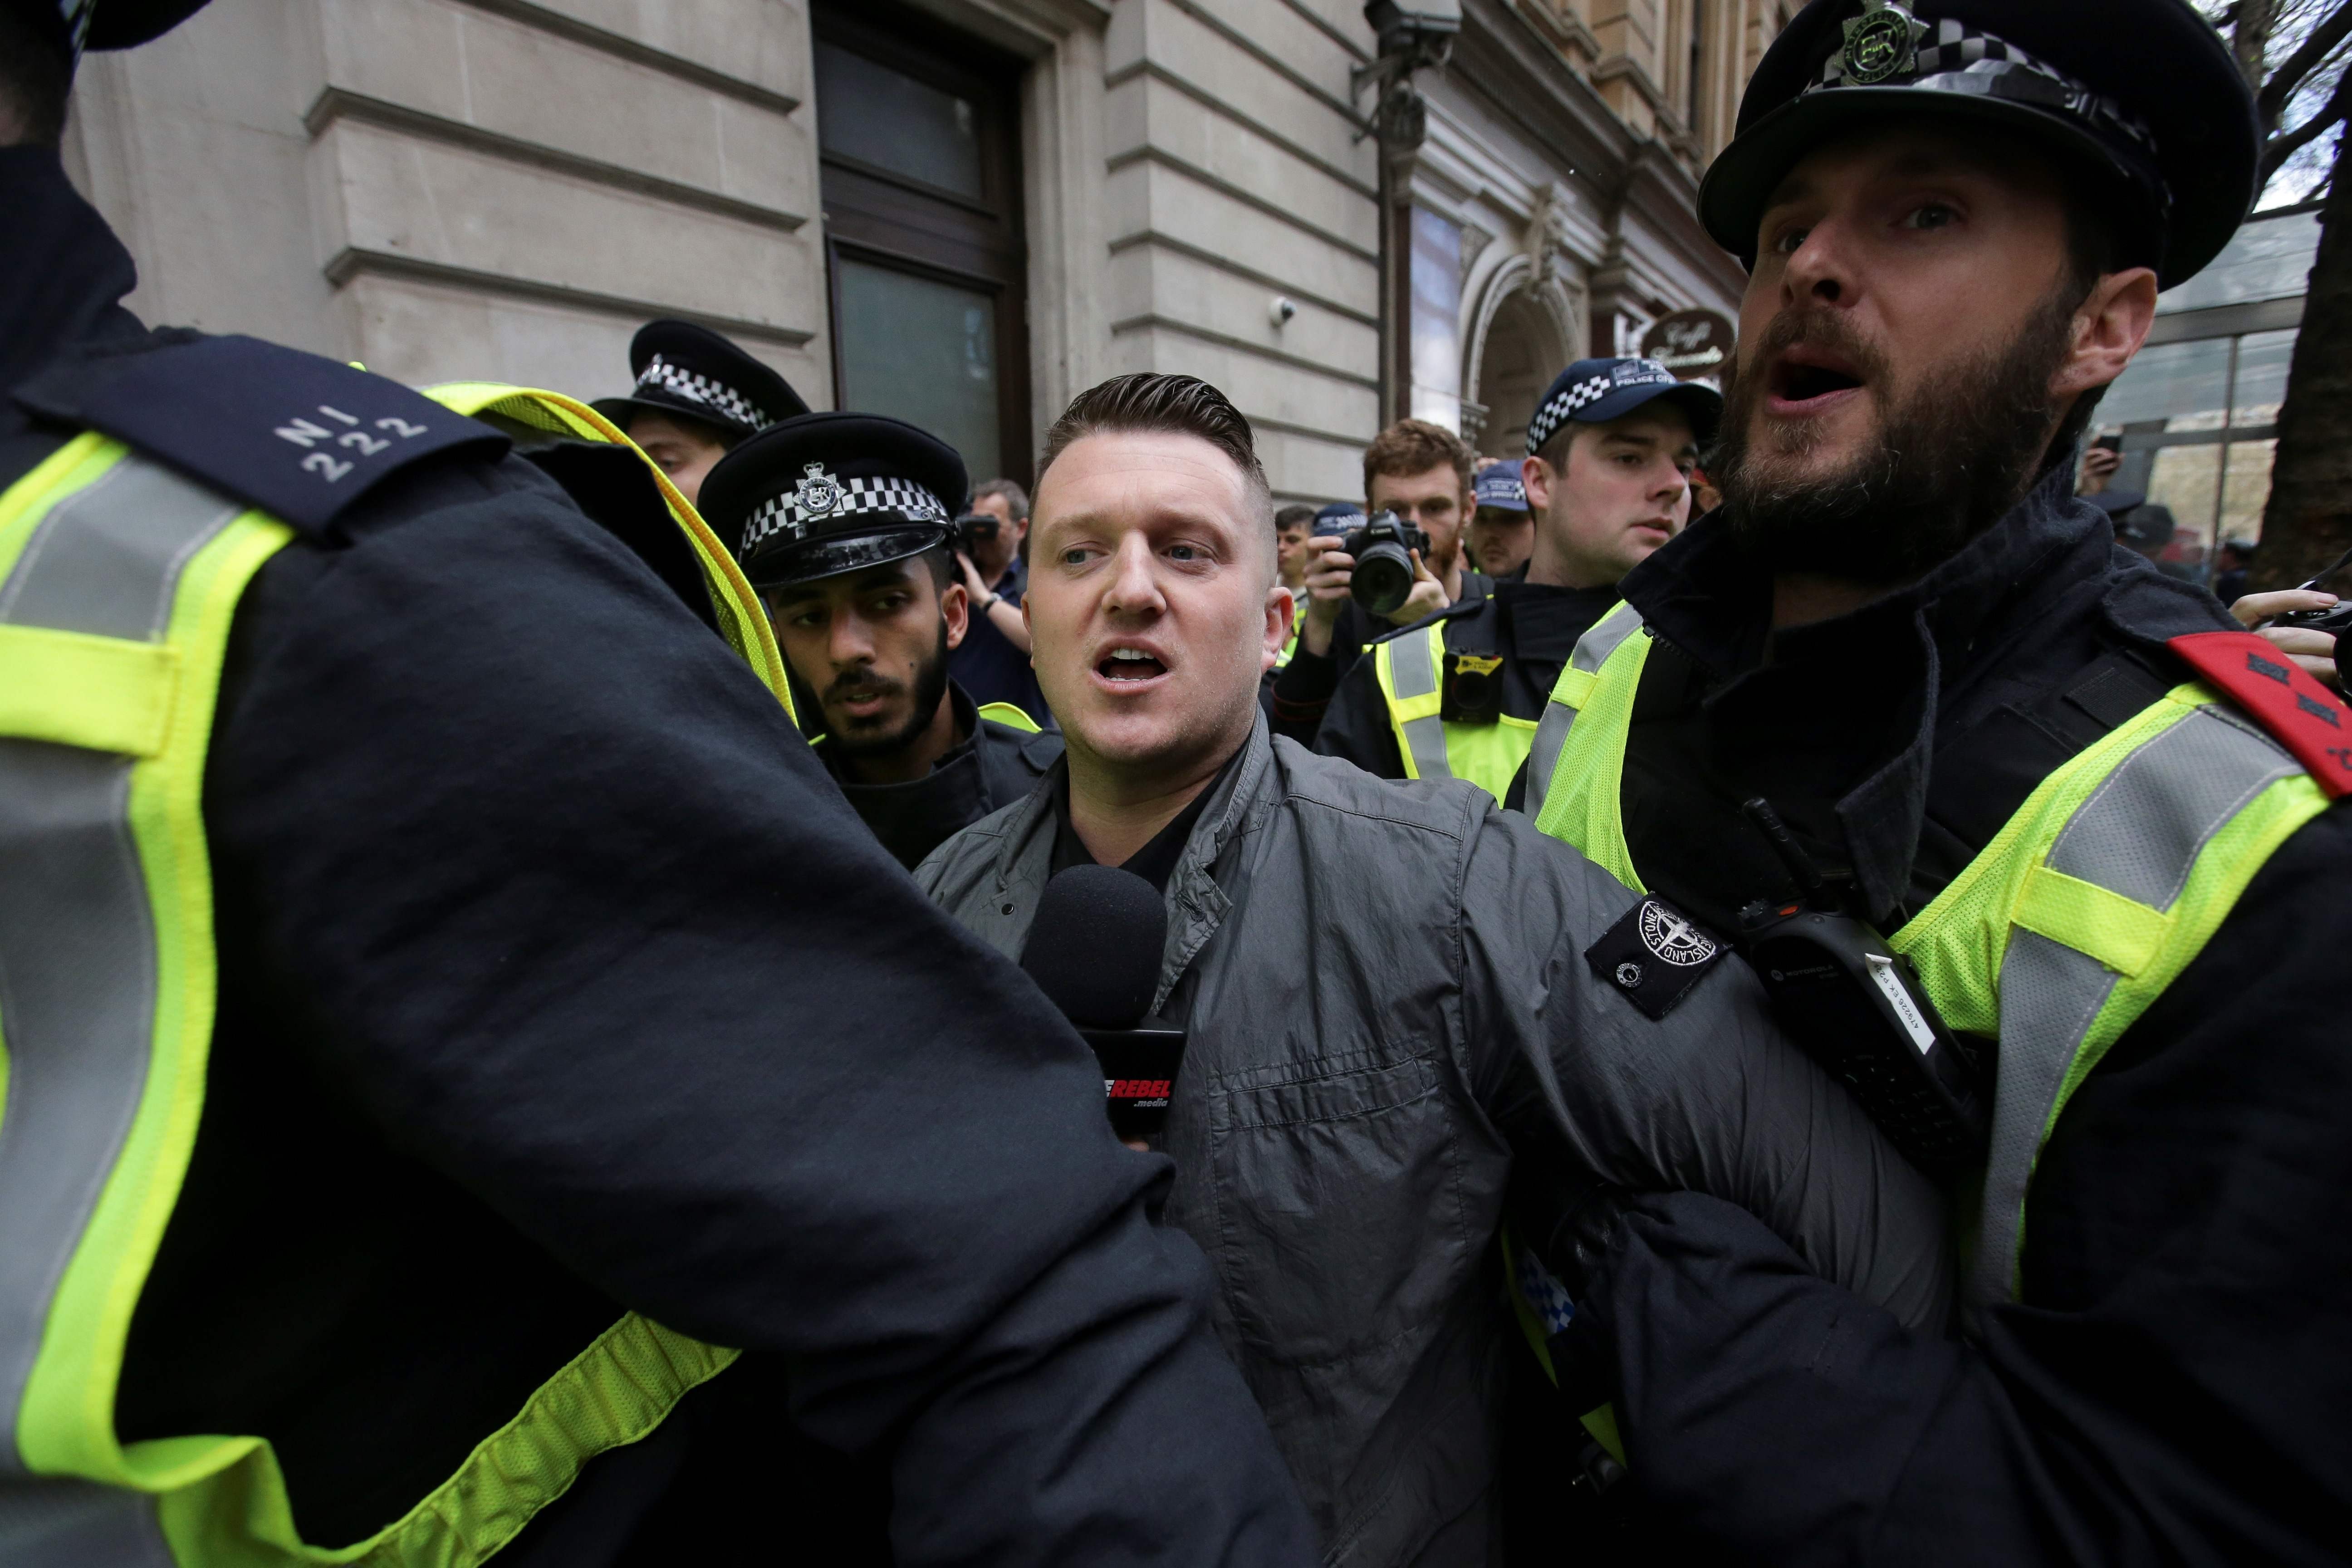 Stephen Christopher Yaxley-Lennon, aka Tommy Robinson, former leader of the right-wing EDL, is escorted away by police from a rally in central London in 2017. Photo: AFP